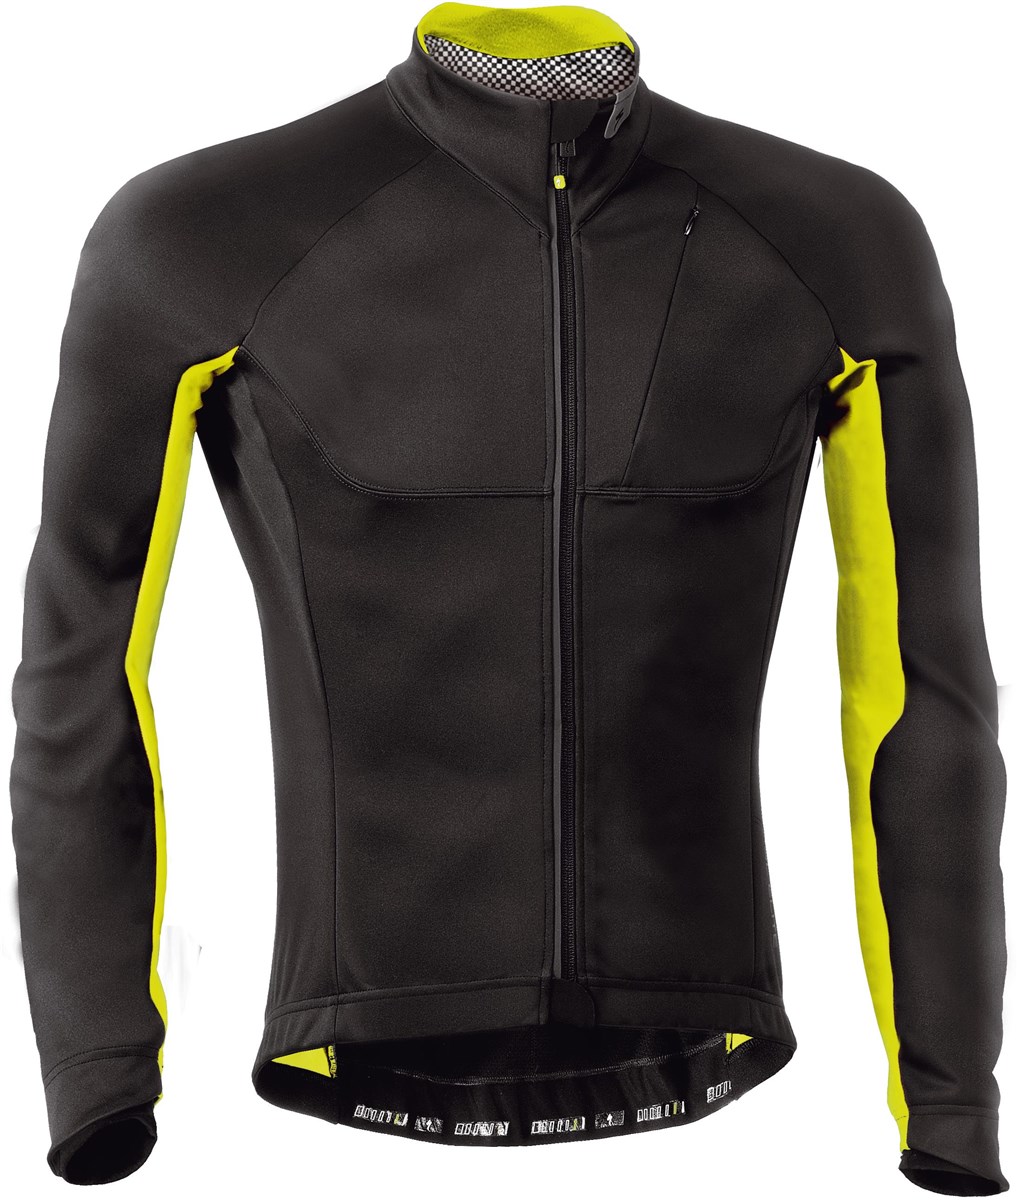 Specialized SL Elite Winter Partial Windproof Cycling Jacket product image